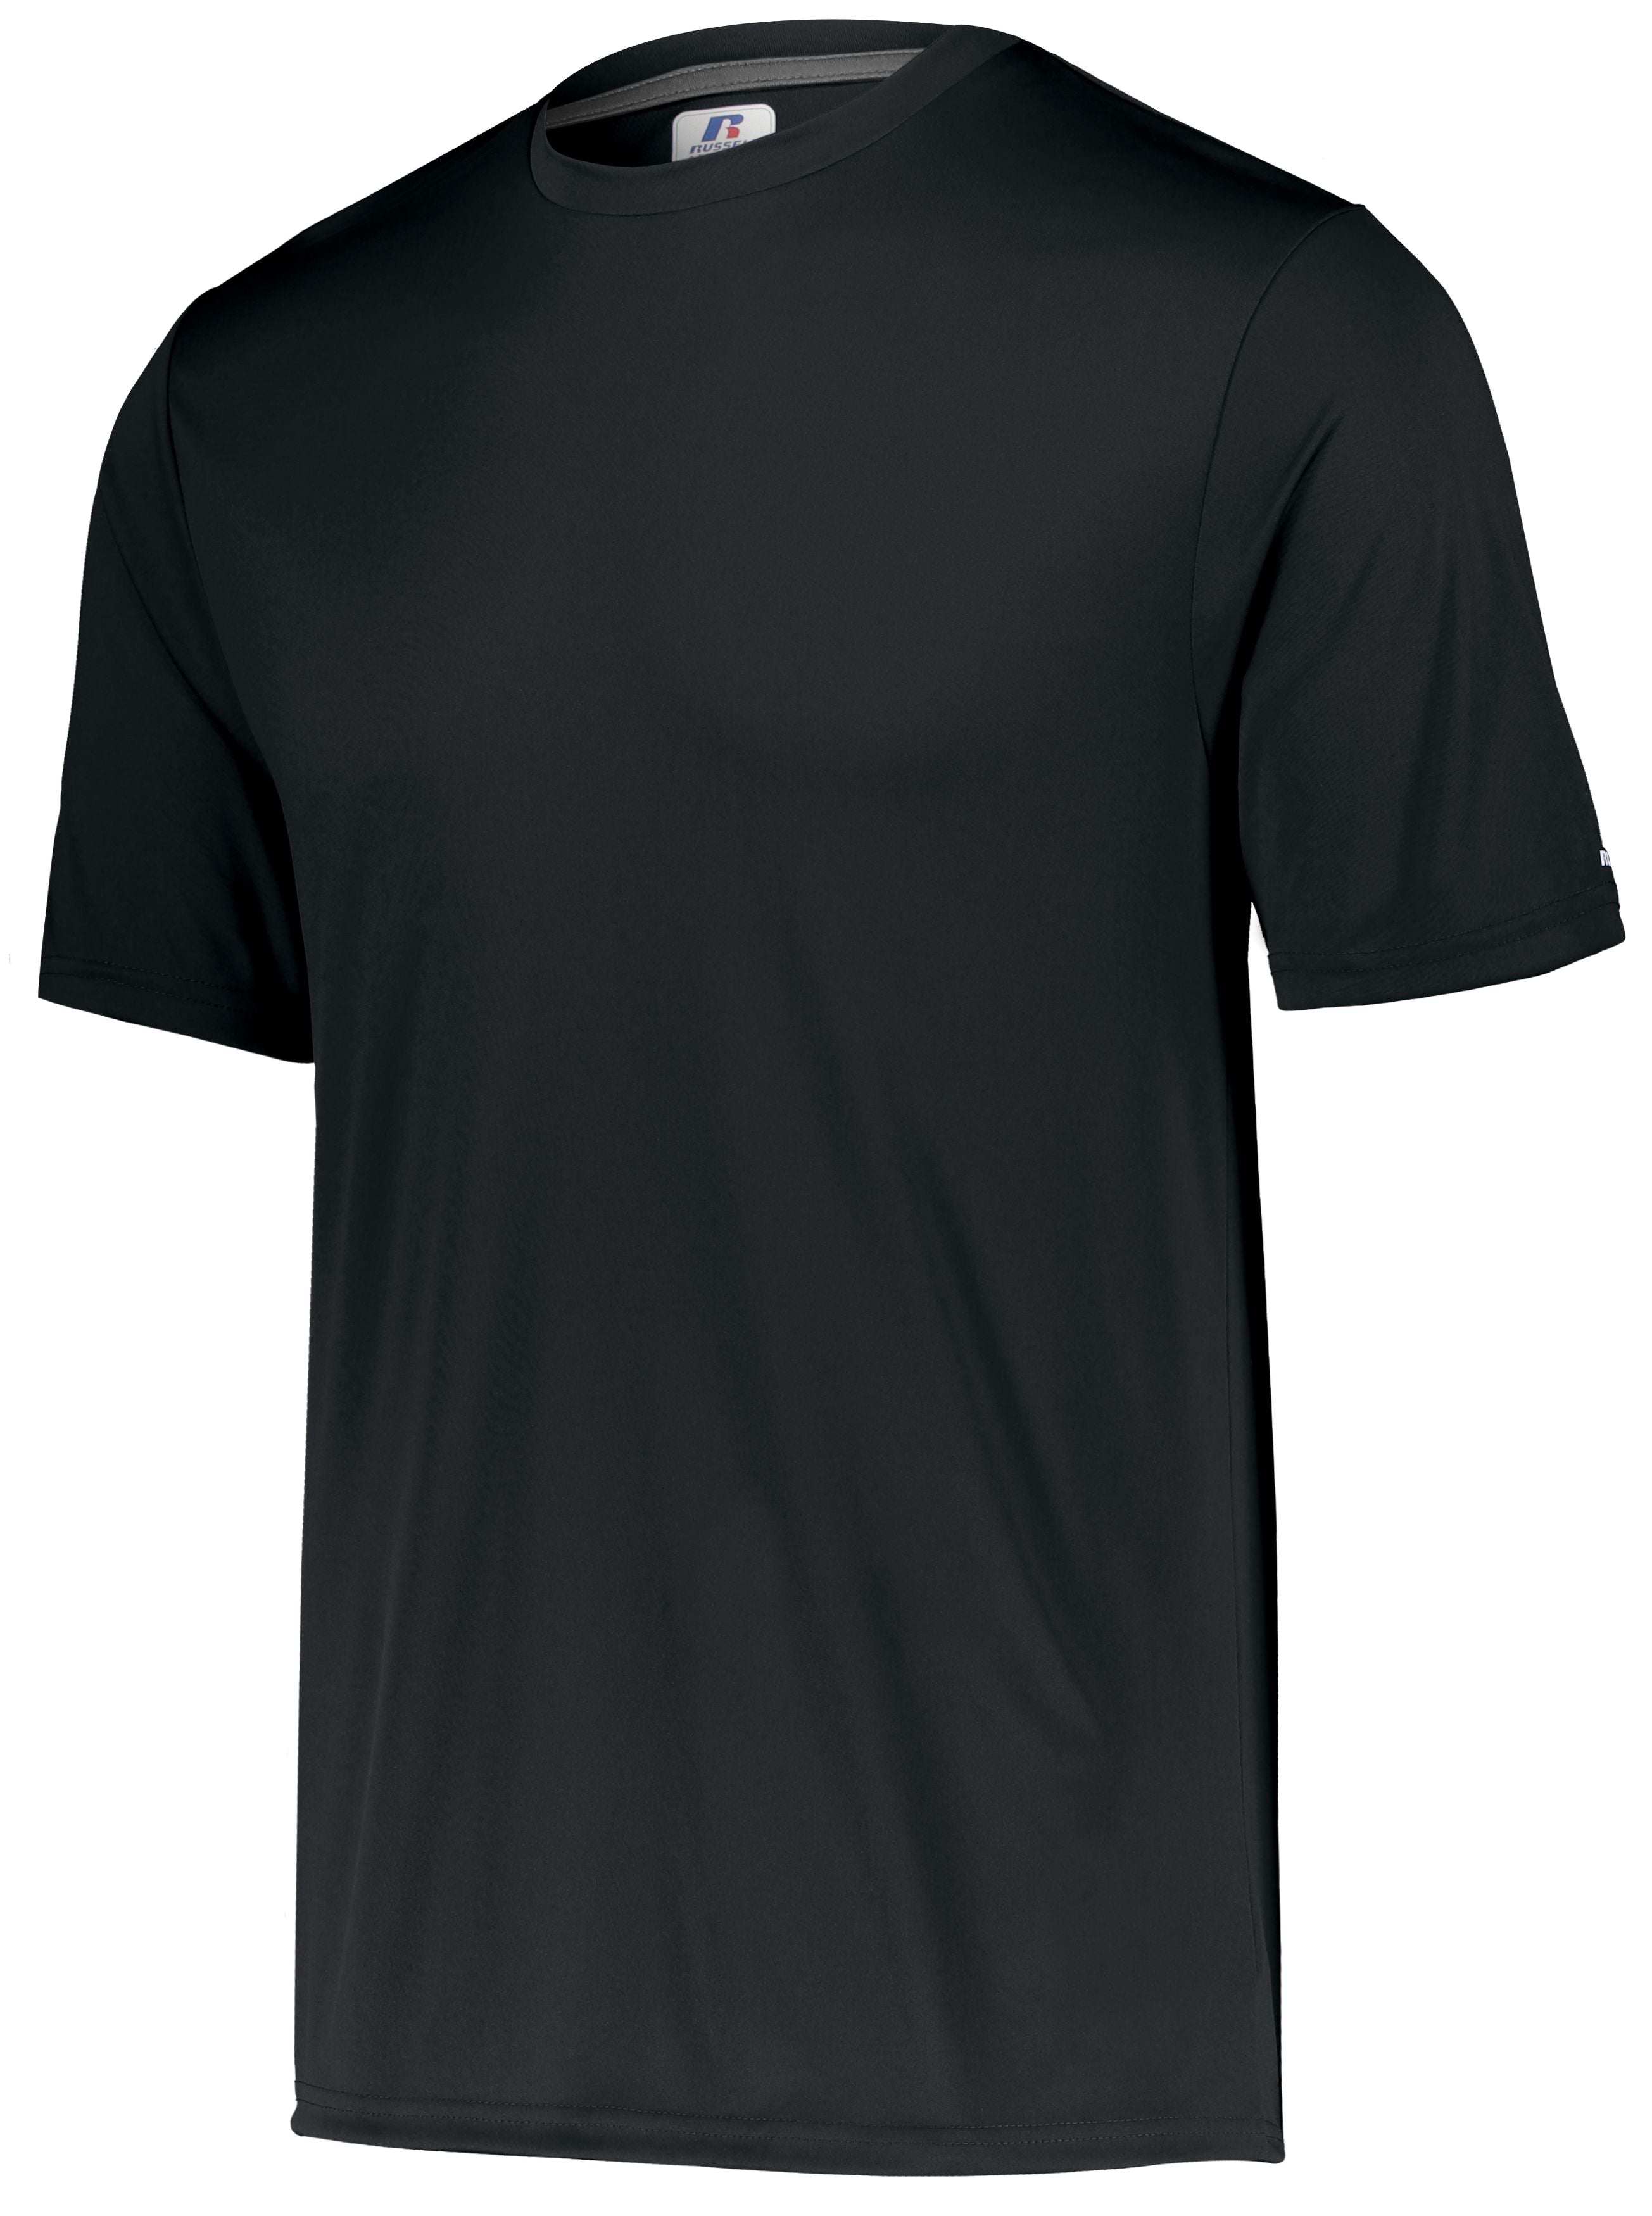 Russell Athletic Dri-Power Core Performance Tee